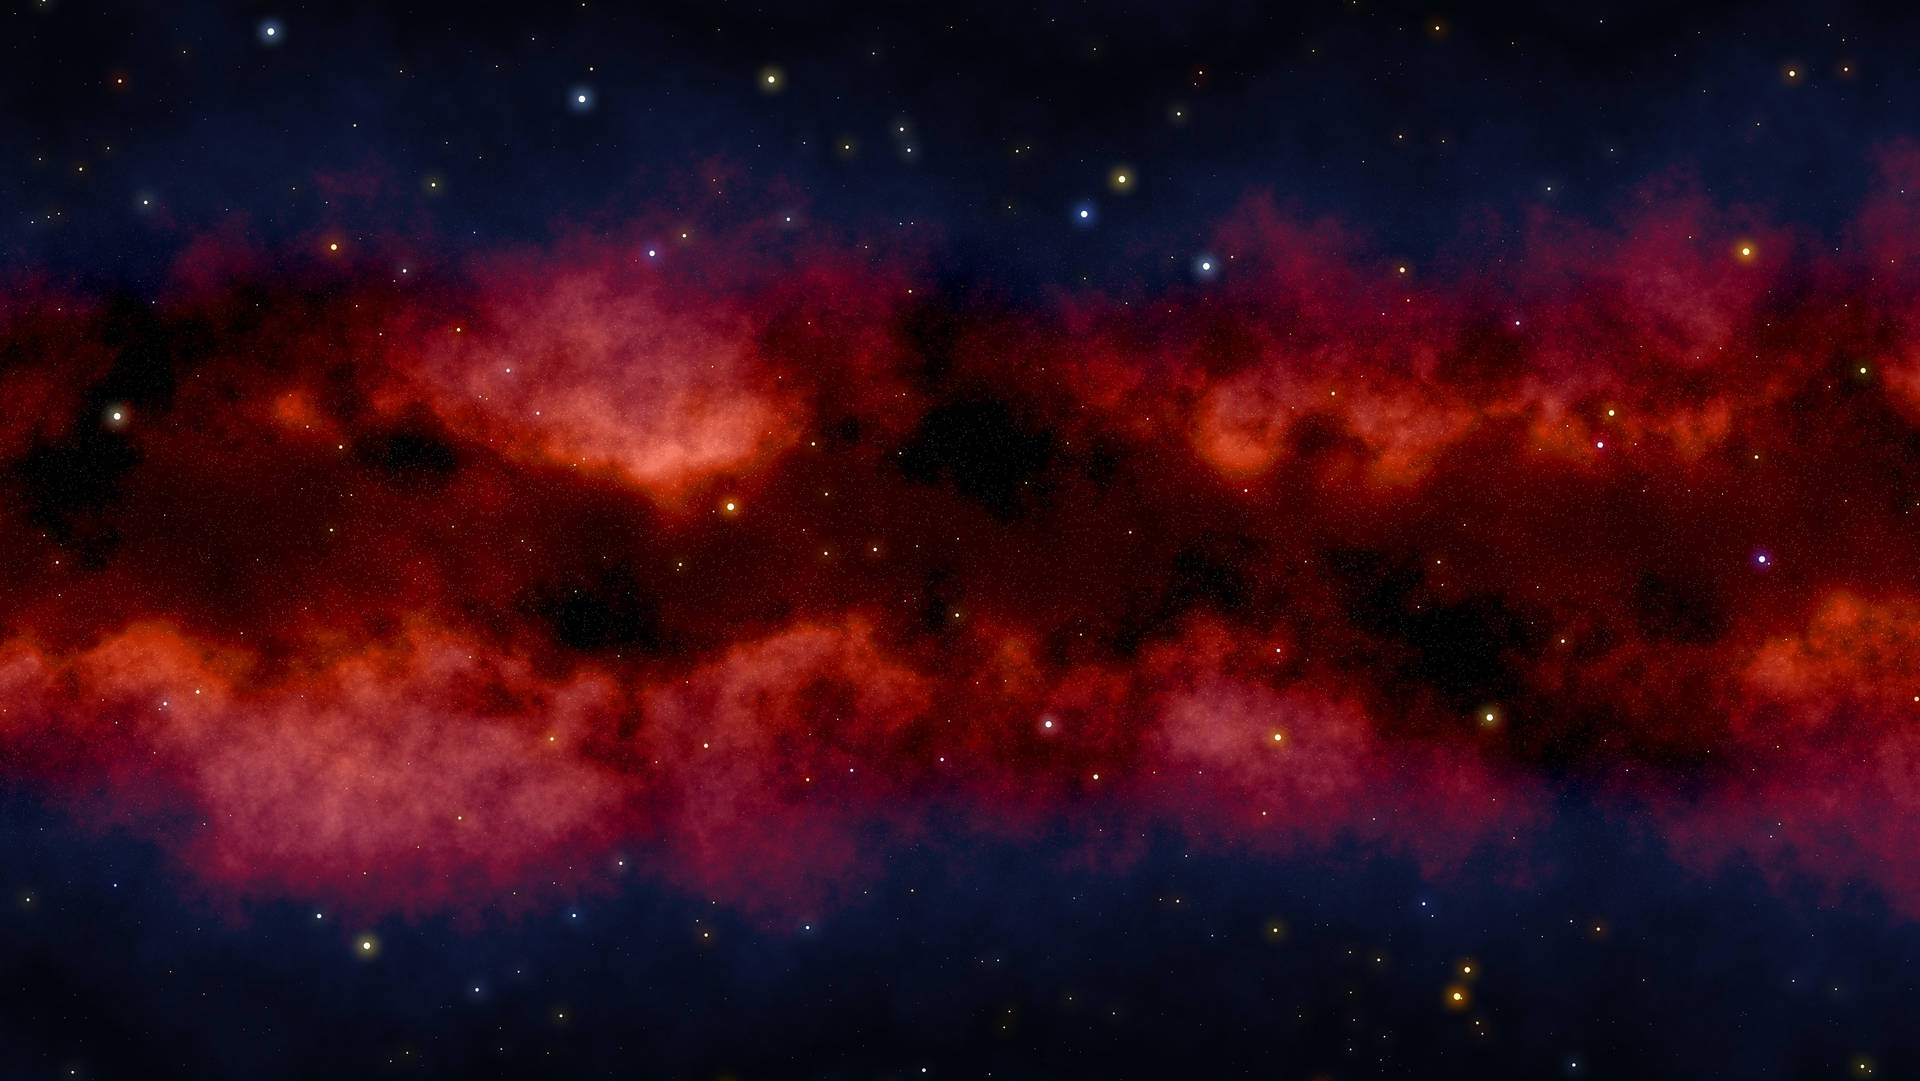 Red Galaxy Hd Wallpapers